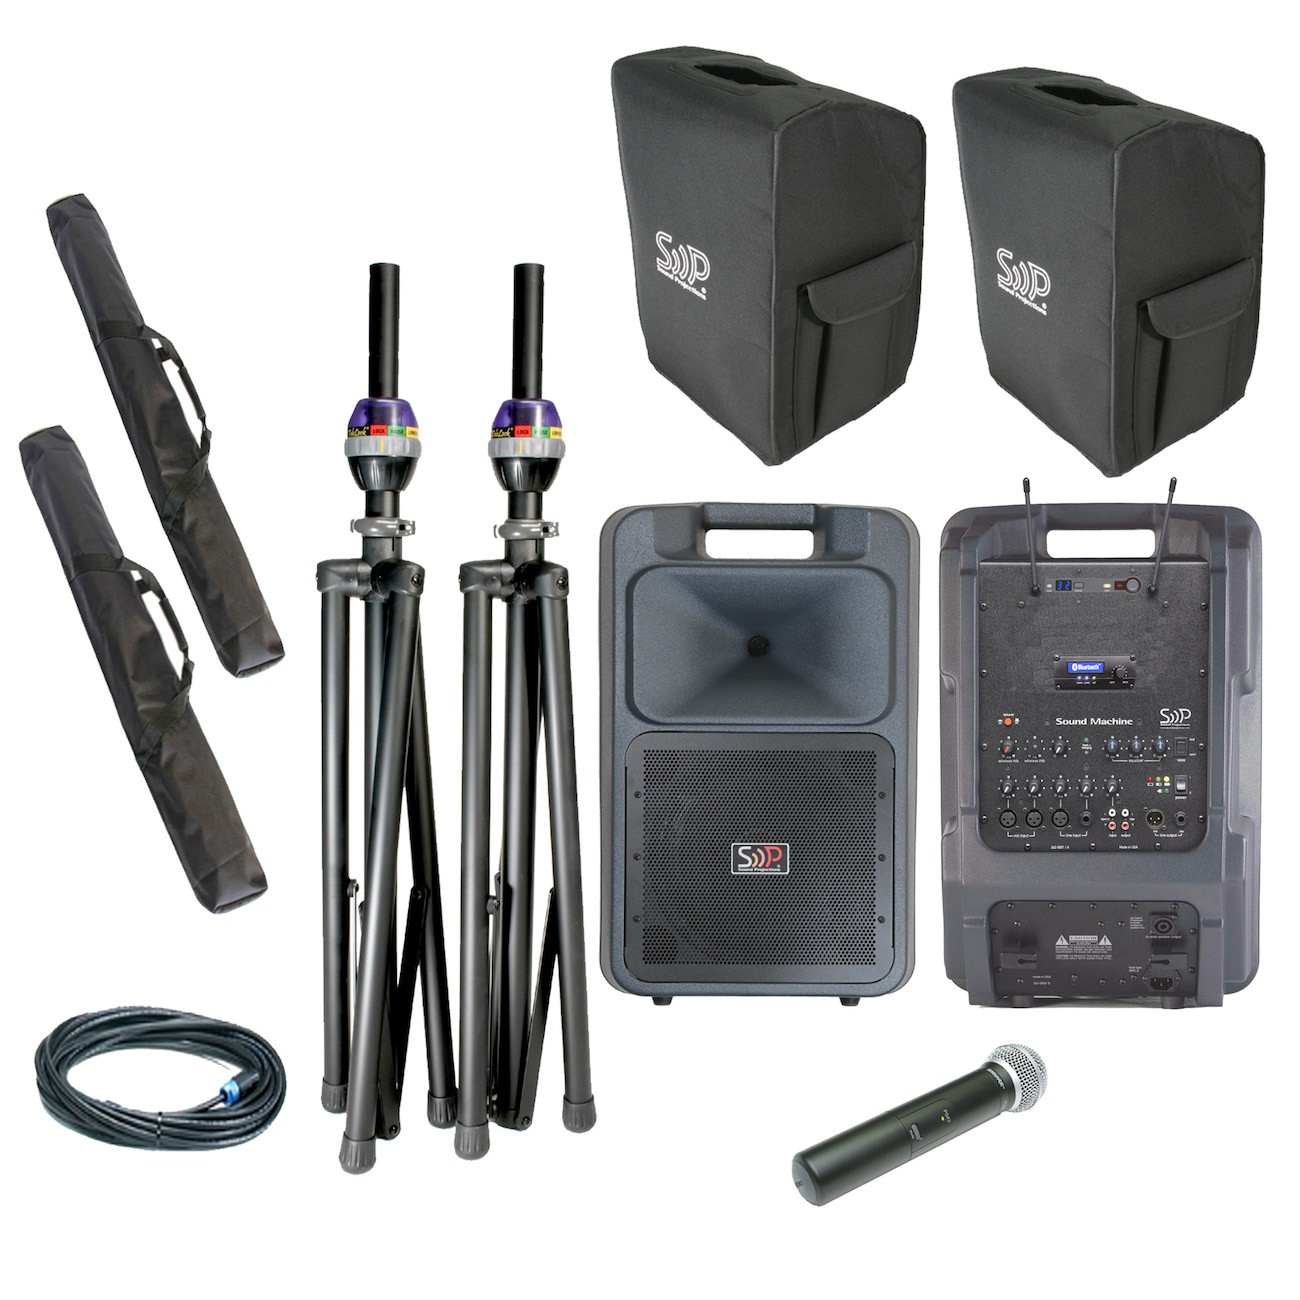 Sound Projections SM-5 Deluxe 60ch Digital handheld wireless OPT-600 pkg with comp speaker 